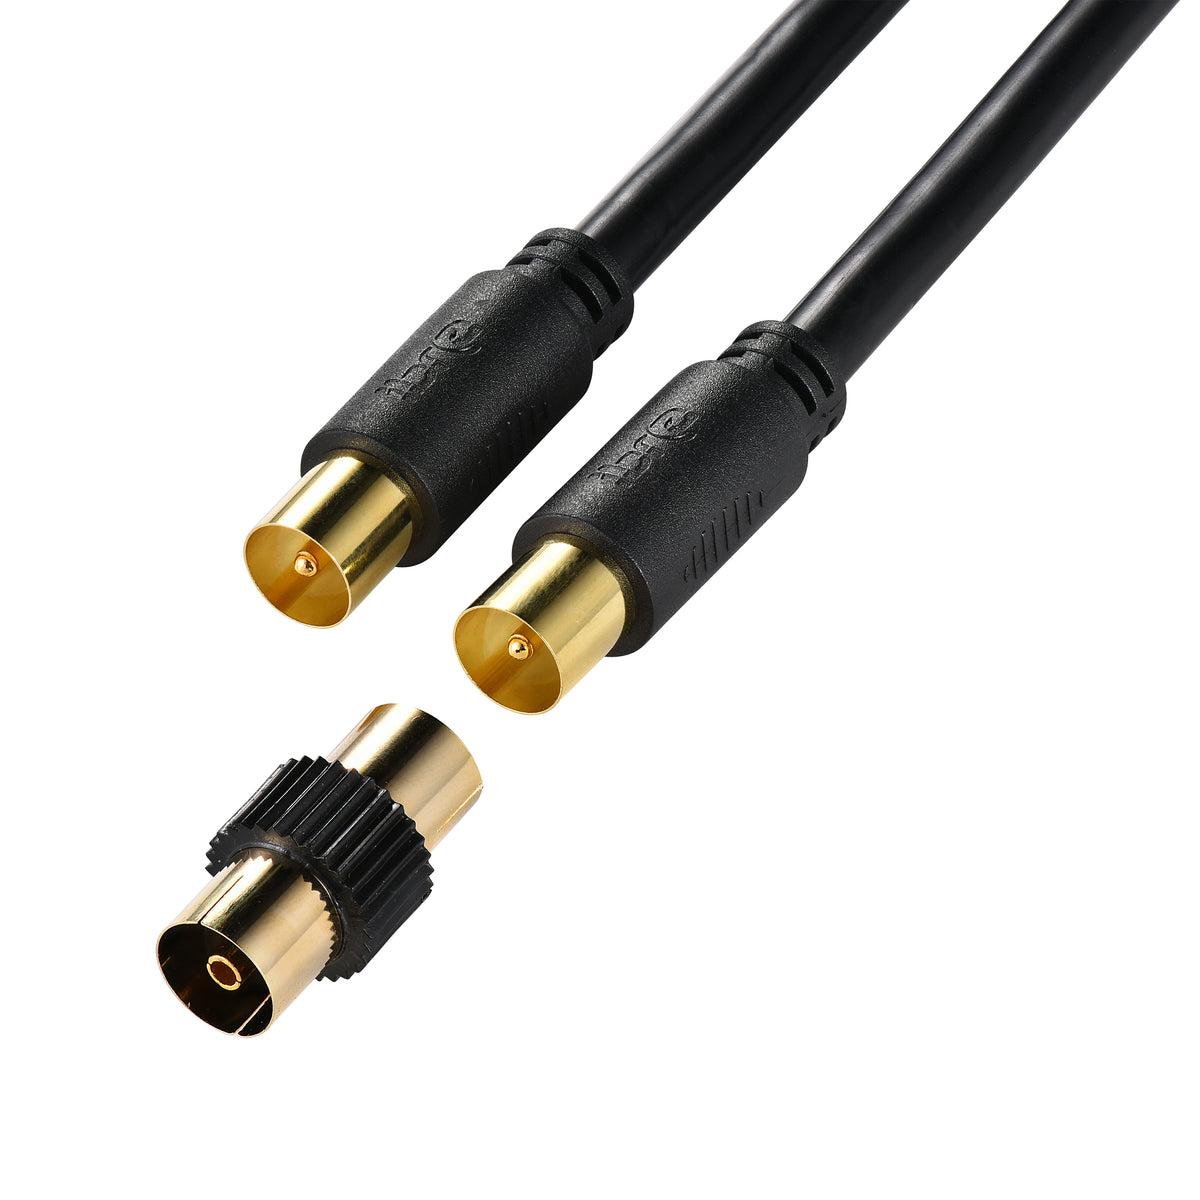 IBRA Aerial Coaxial Cable 6M with Gold-Plated Connectors, Male to Male RF Coax Lead with Female Adapter Coupler for Freeview, Freesat, Sky, Virgin, BT, You View, Satellite TV - Black